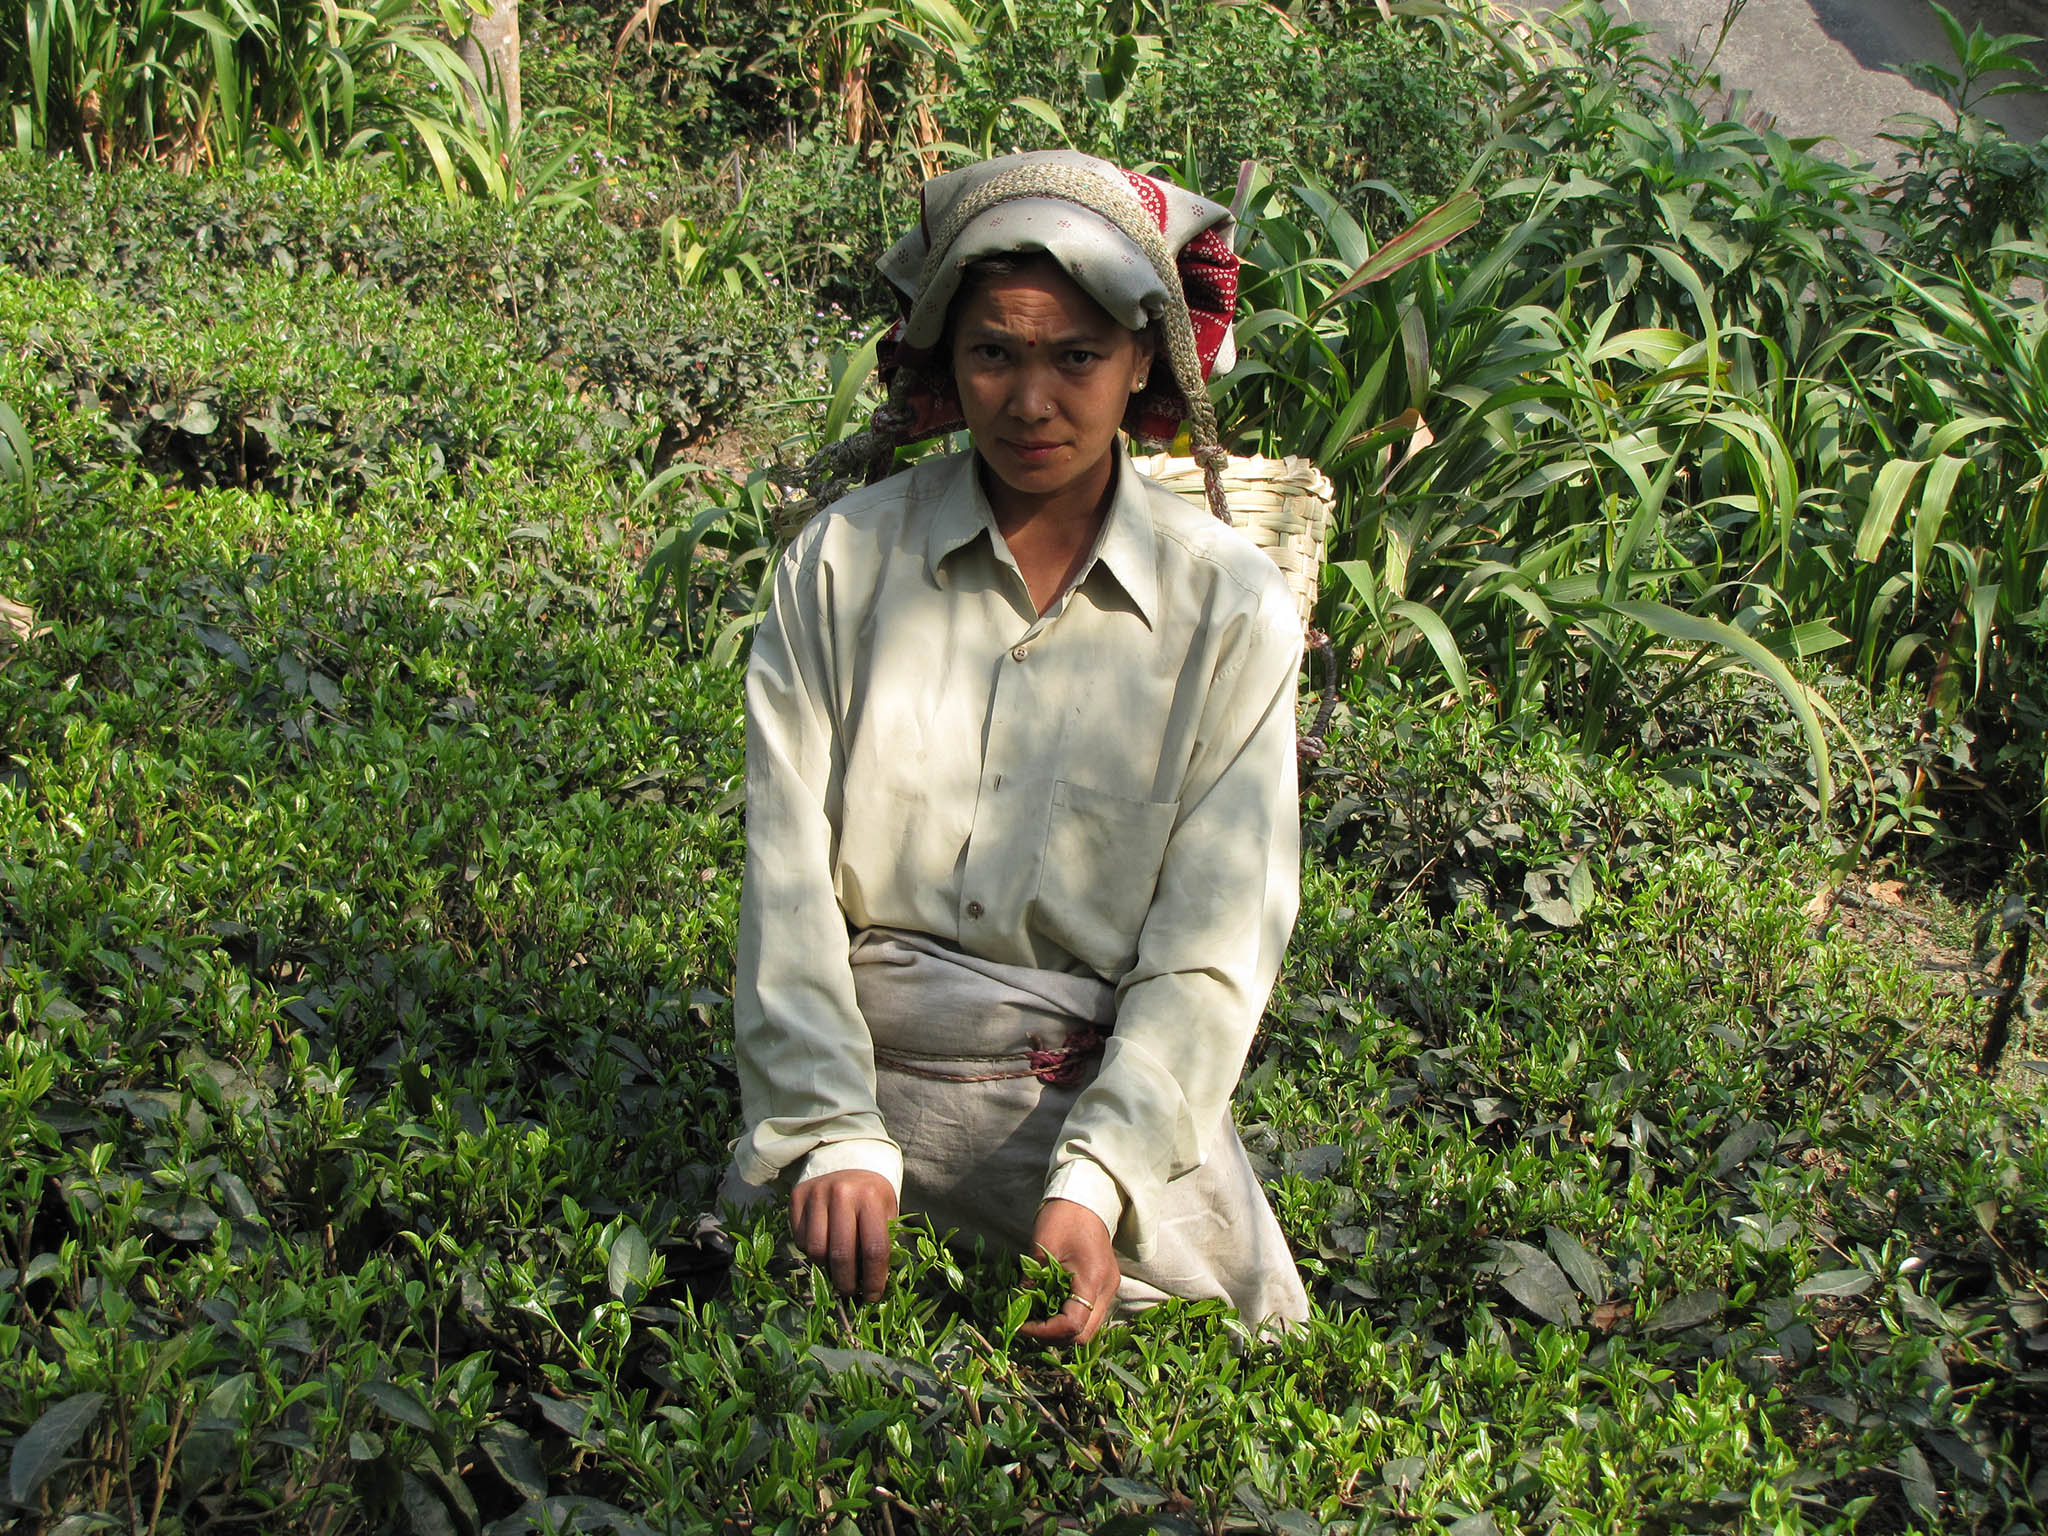 The Makaibari estate in West Bengal, India, is one of Rare Tea’s certified sources